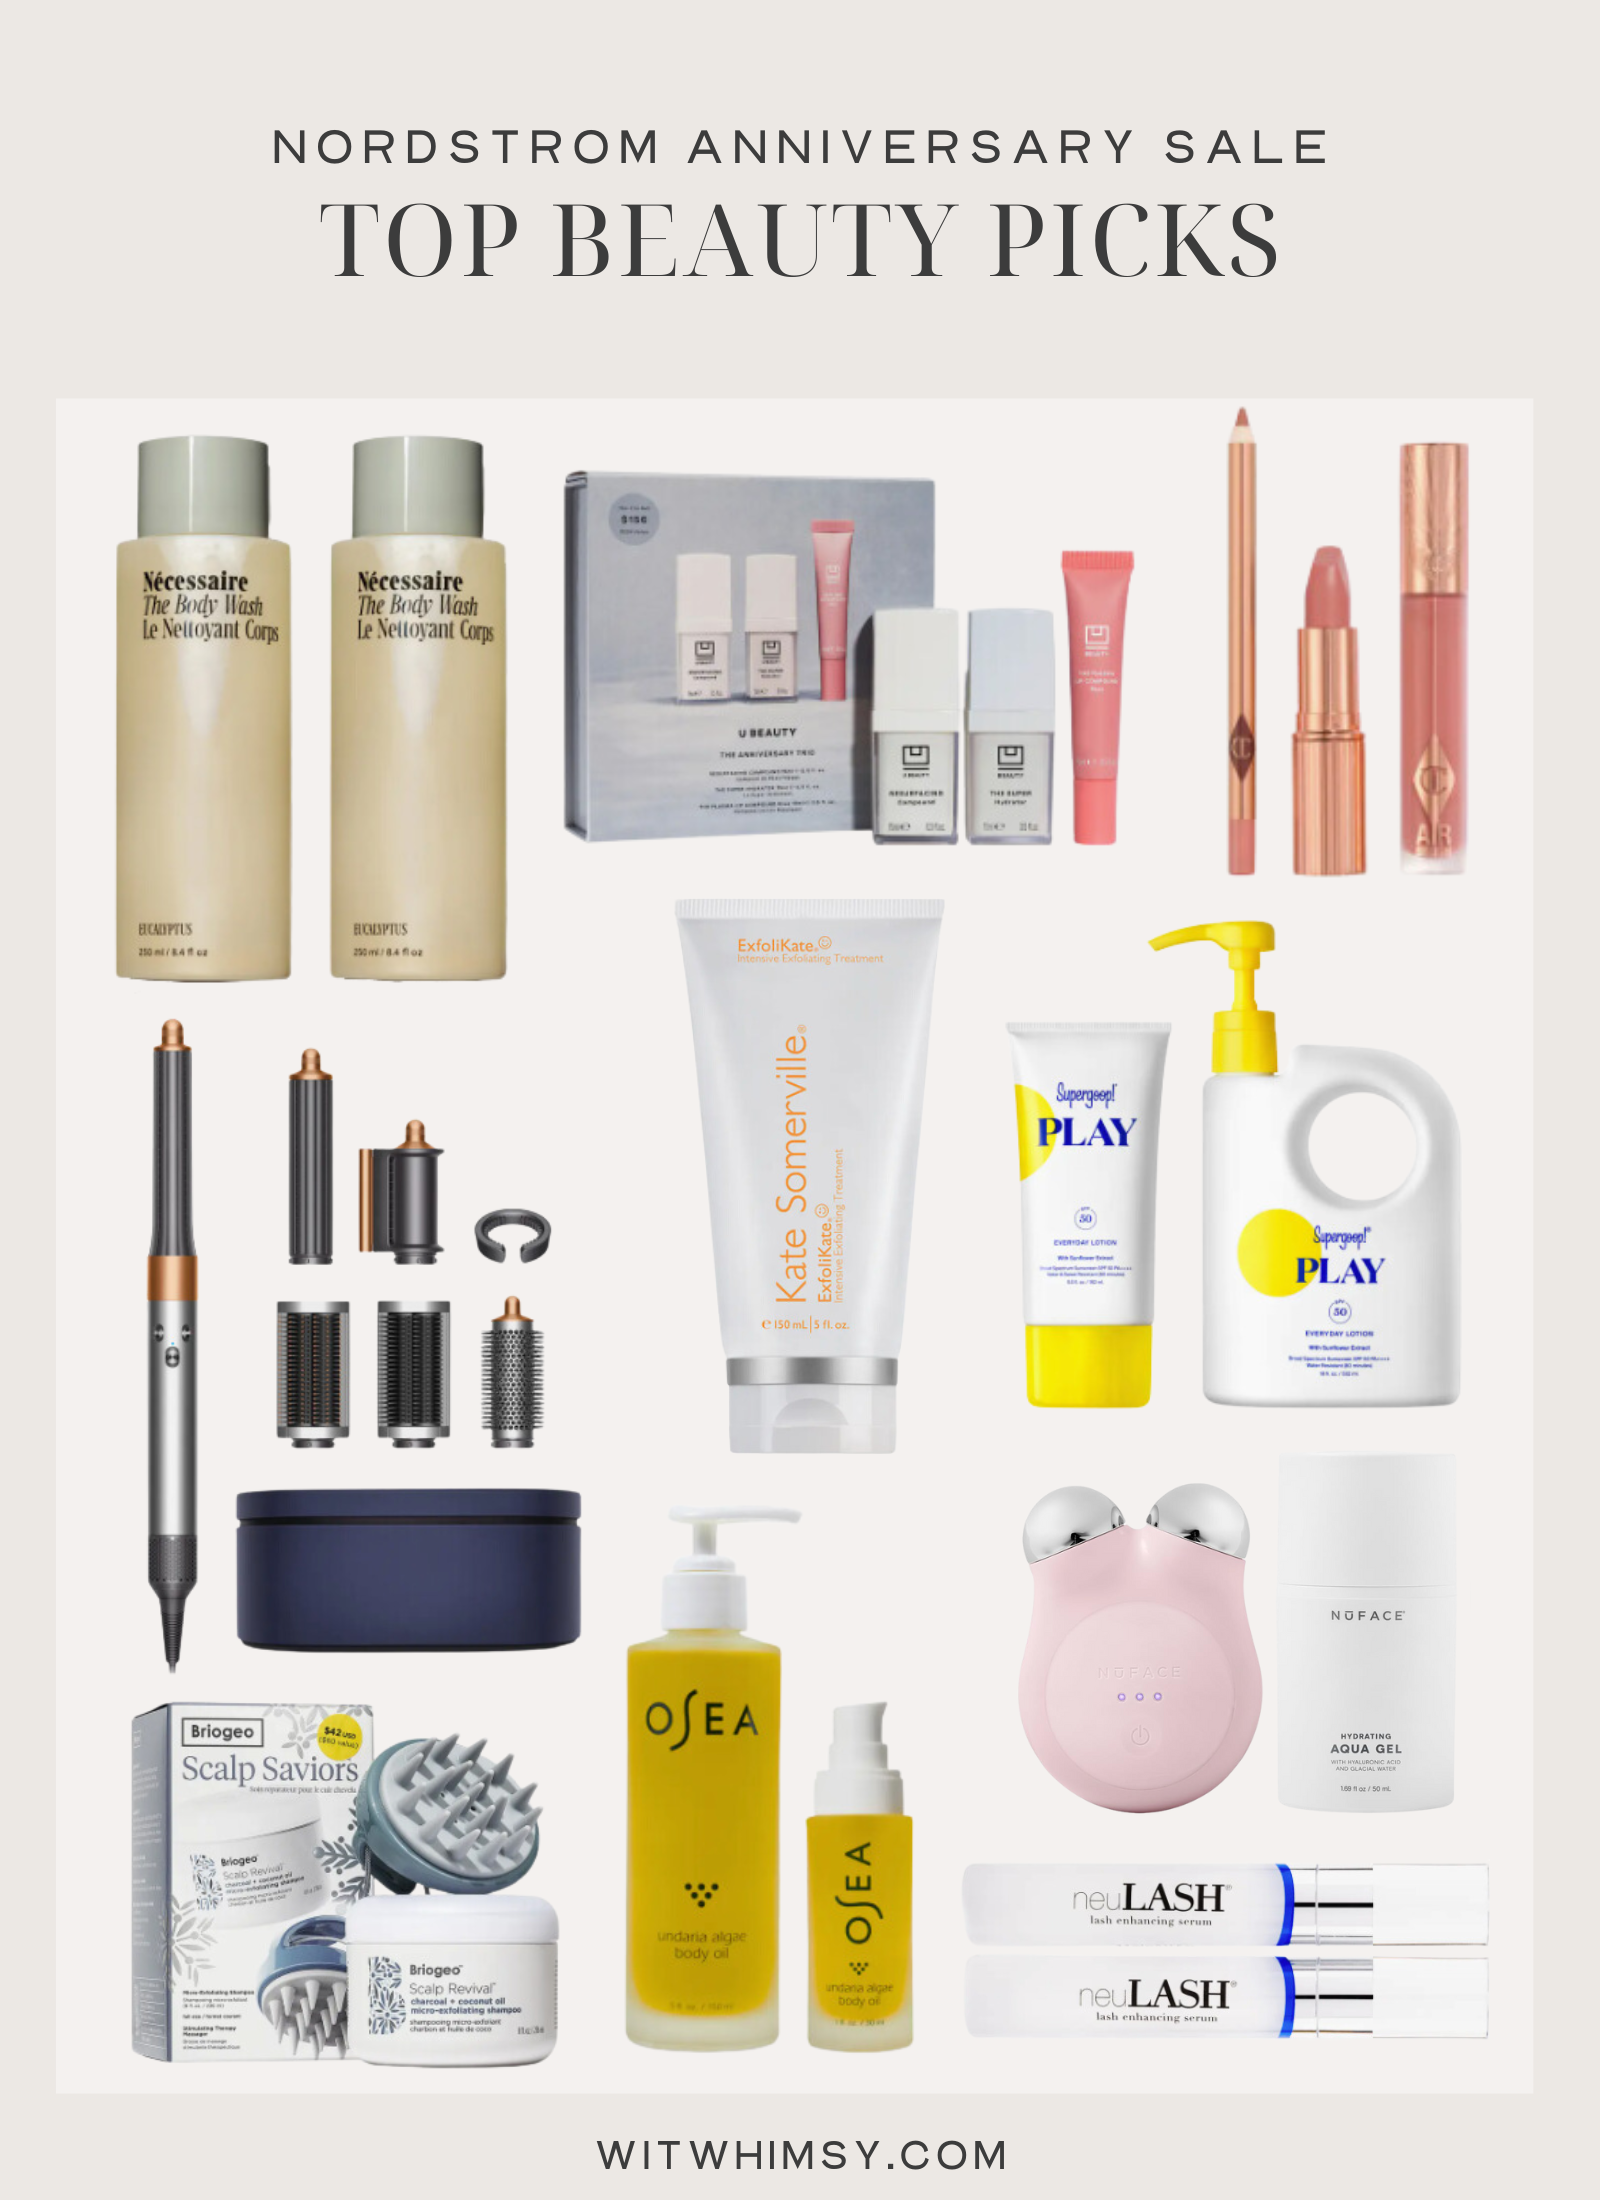 Collage of top beauty and skincare picks from Nordstrom Anniversary Sale